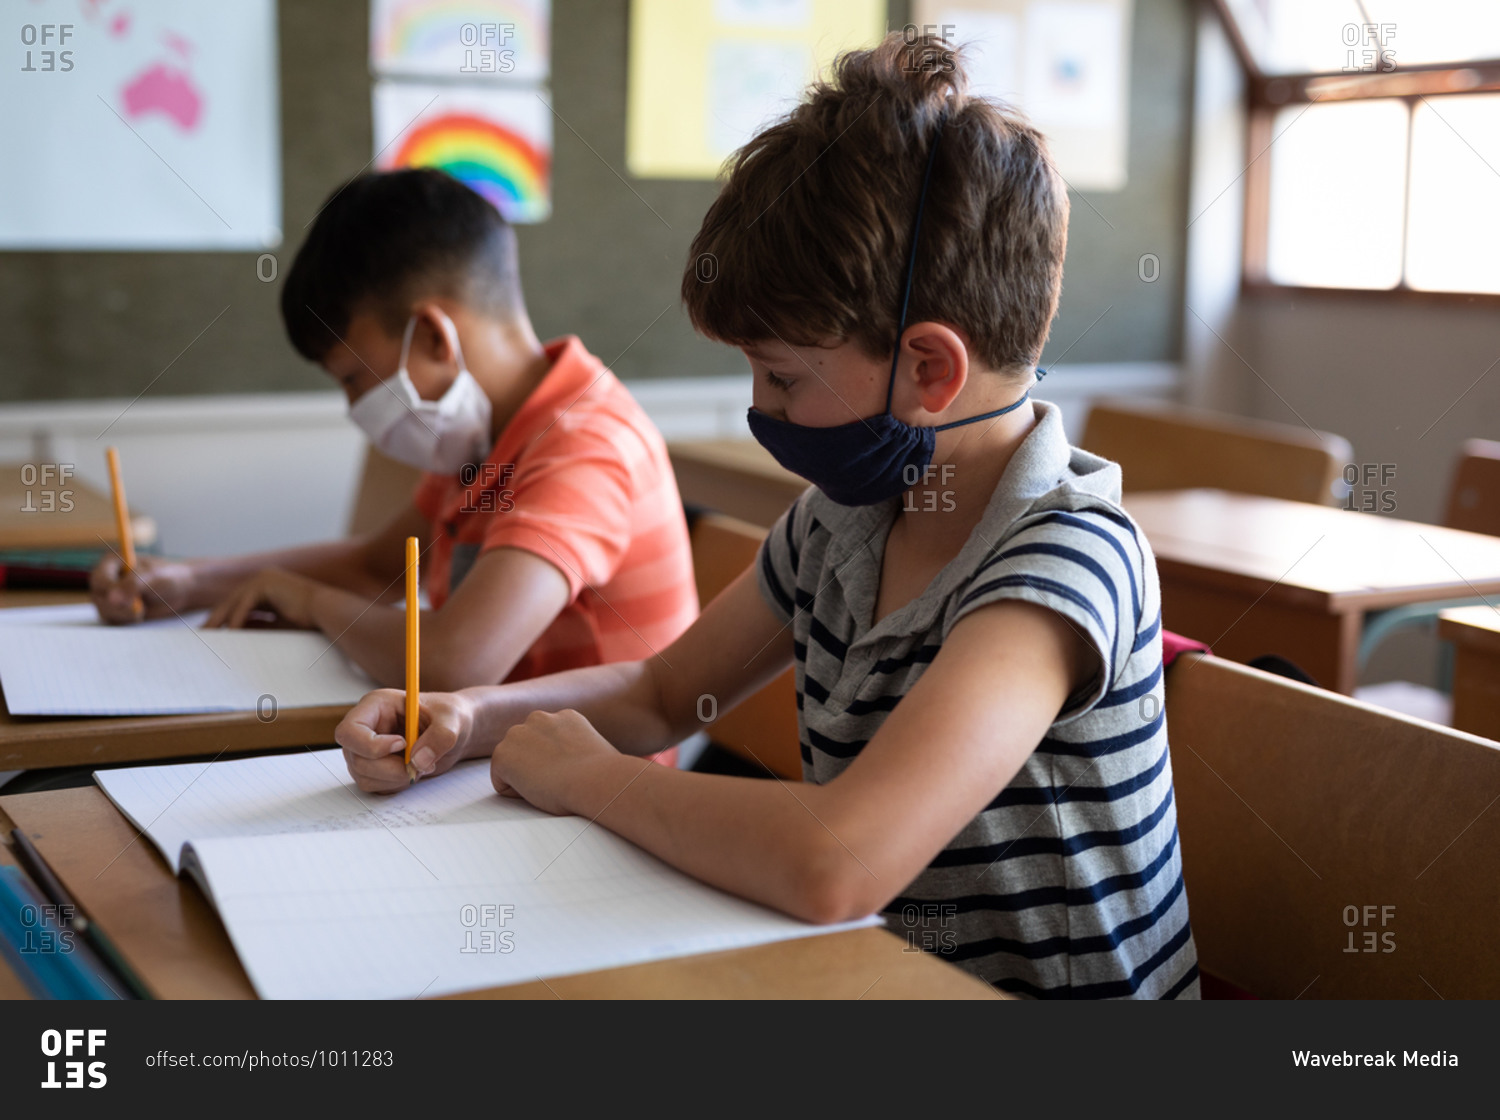 Two multi ethnic boys sitting at desks wearing face masks in classroom. Primary education social distancing health safety during Covid19 Coronavirus pandemic.